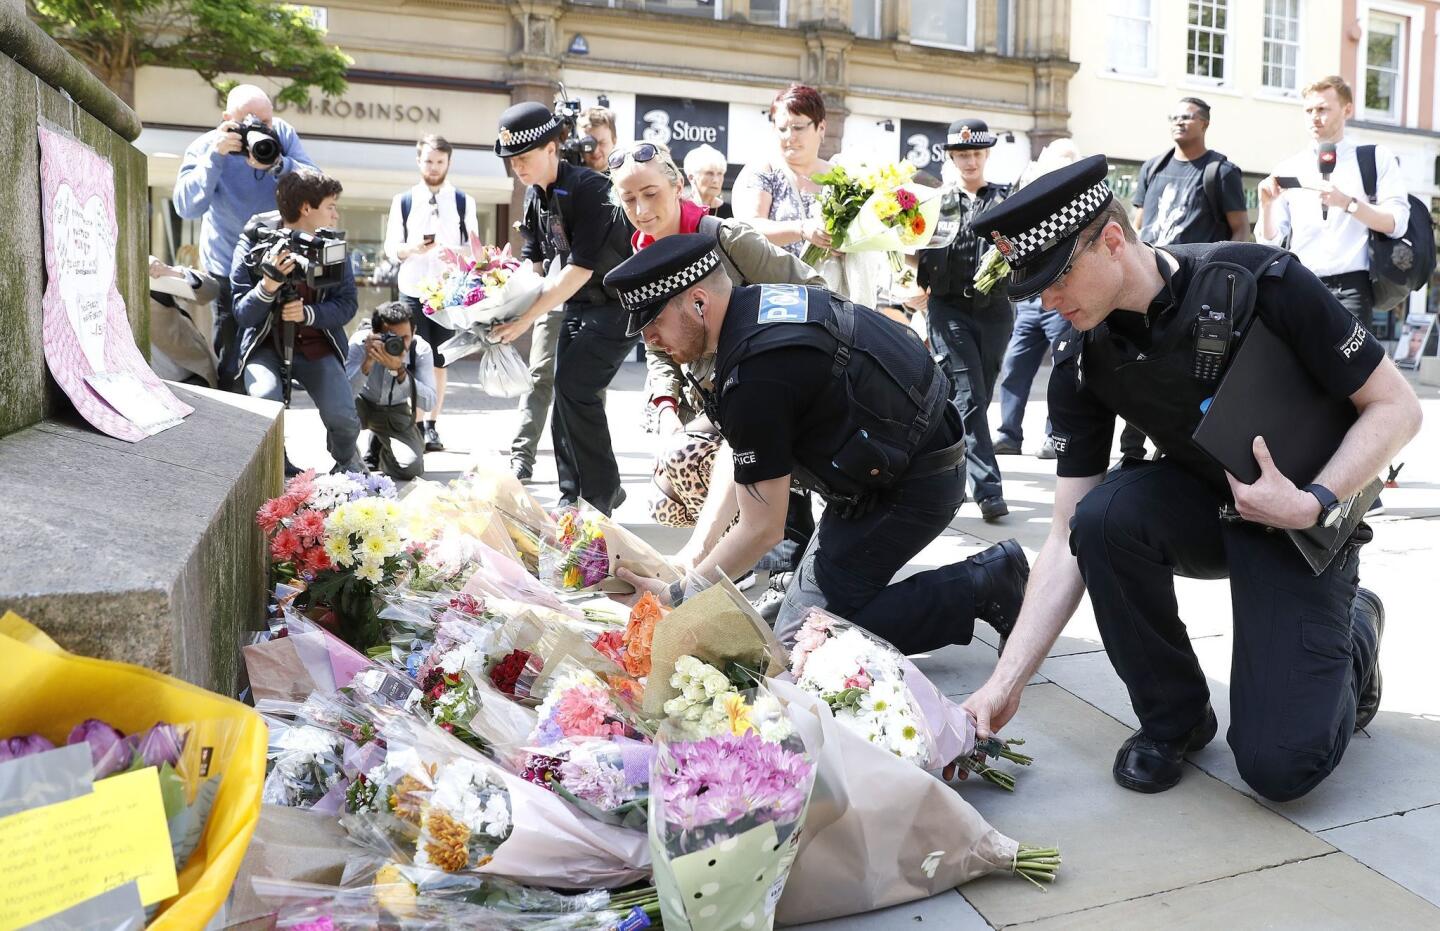 Police officers on May 23, 2017, add to the flowers for the victims of the previous night's explosion at an Ariana Grande concert in Manchester, England.